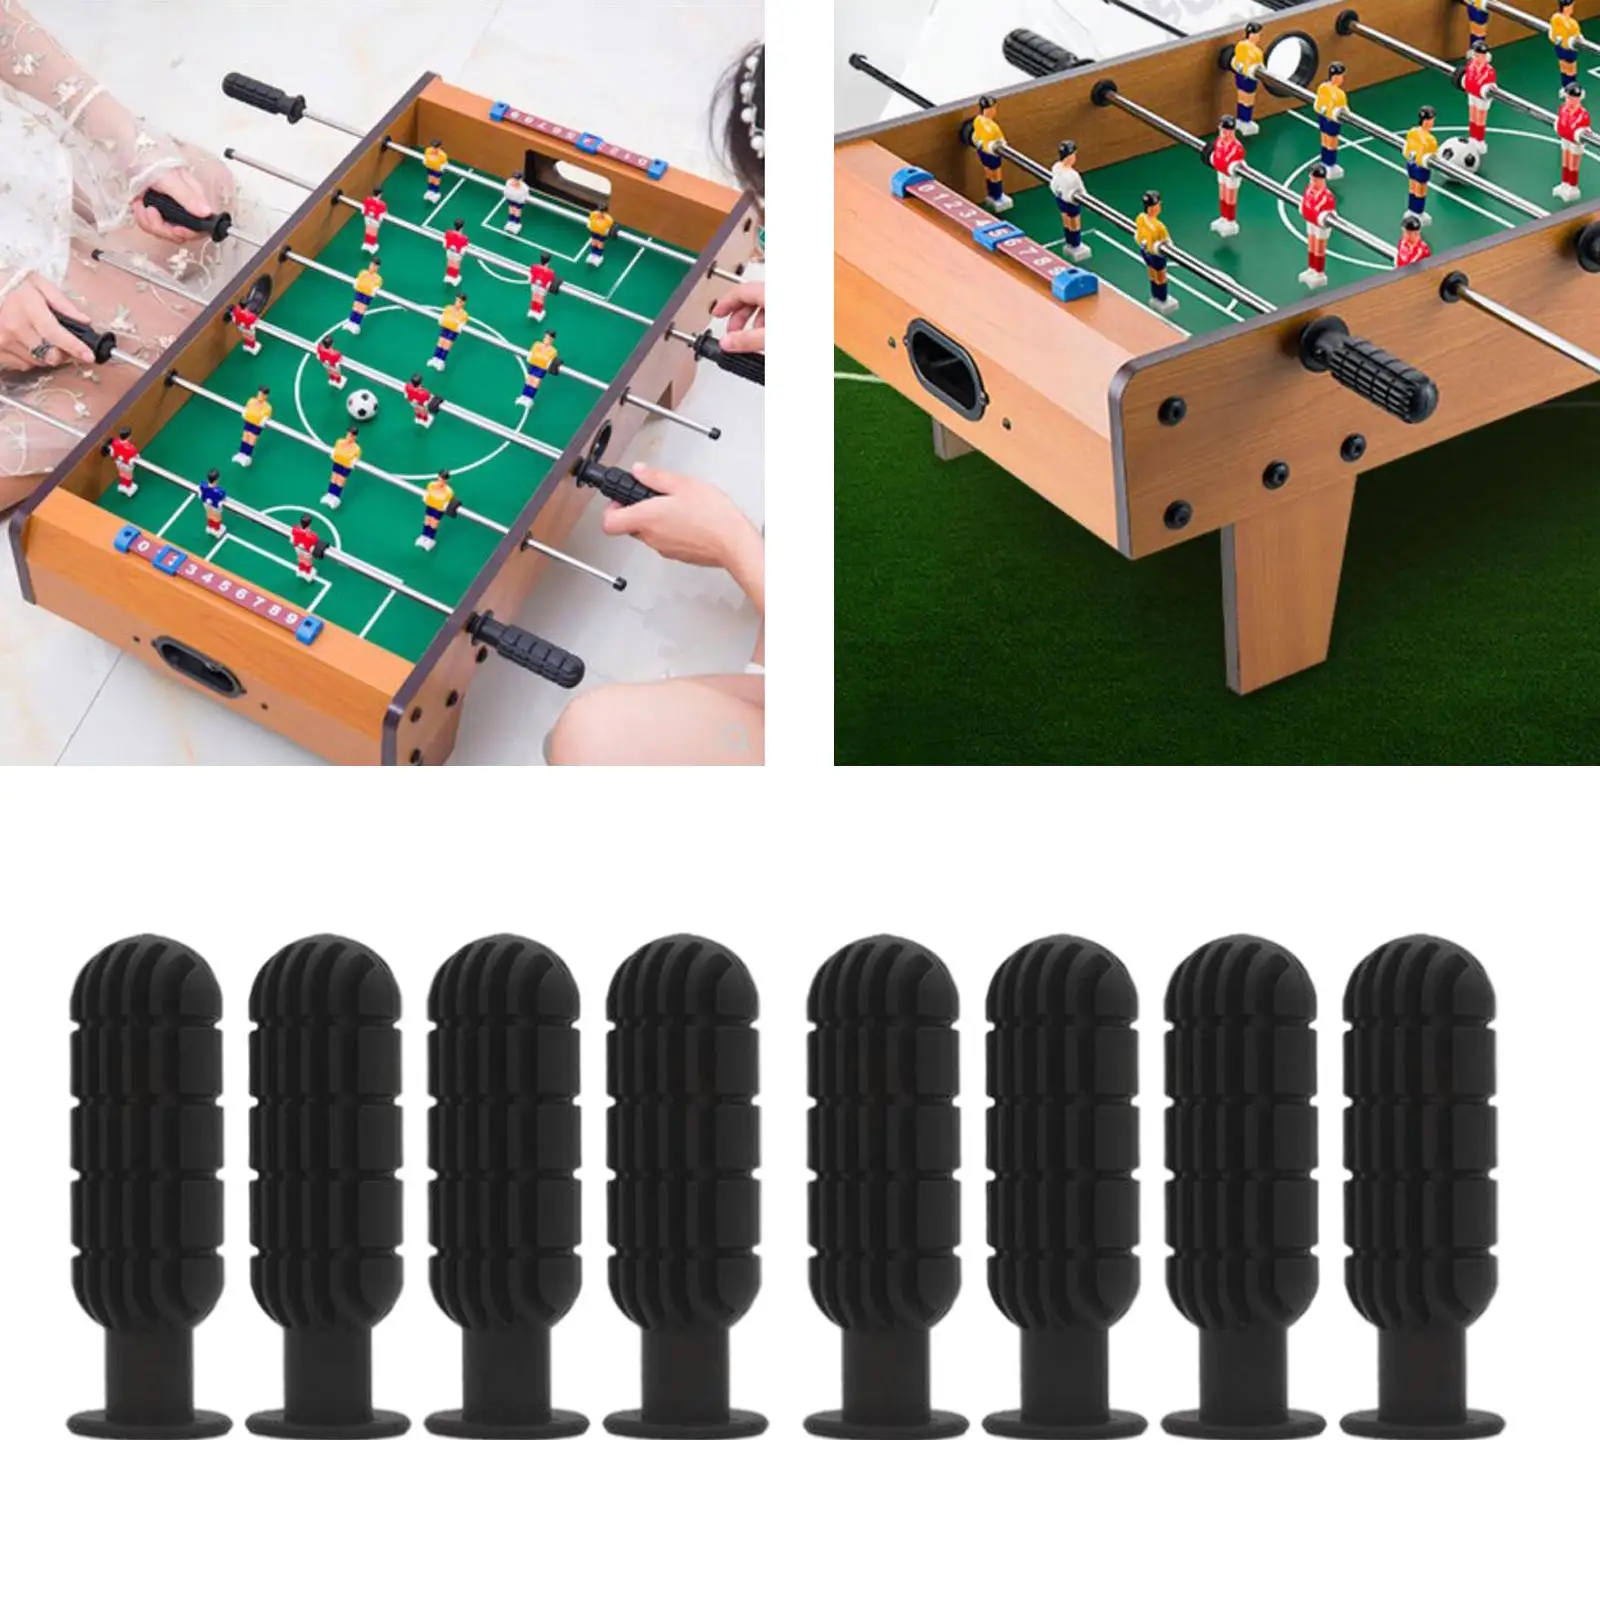 8 Pcs Table Soccer Foosball Handle Rod 94mm Foosball Soccer Table Football Machine Handle Grip Game Replacement Parts